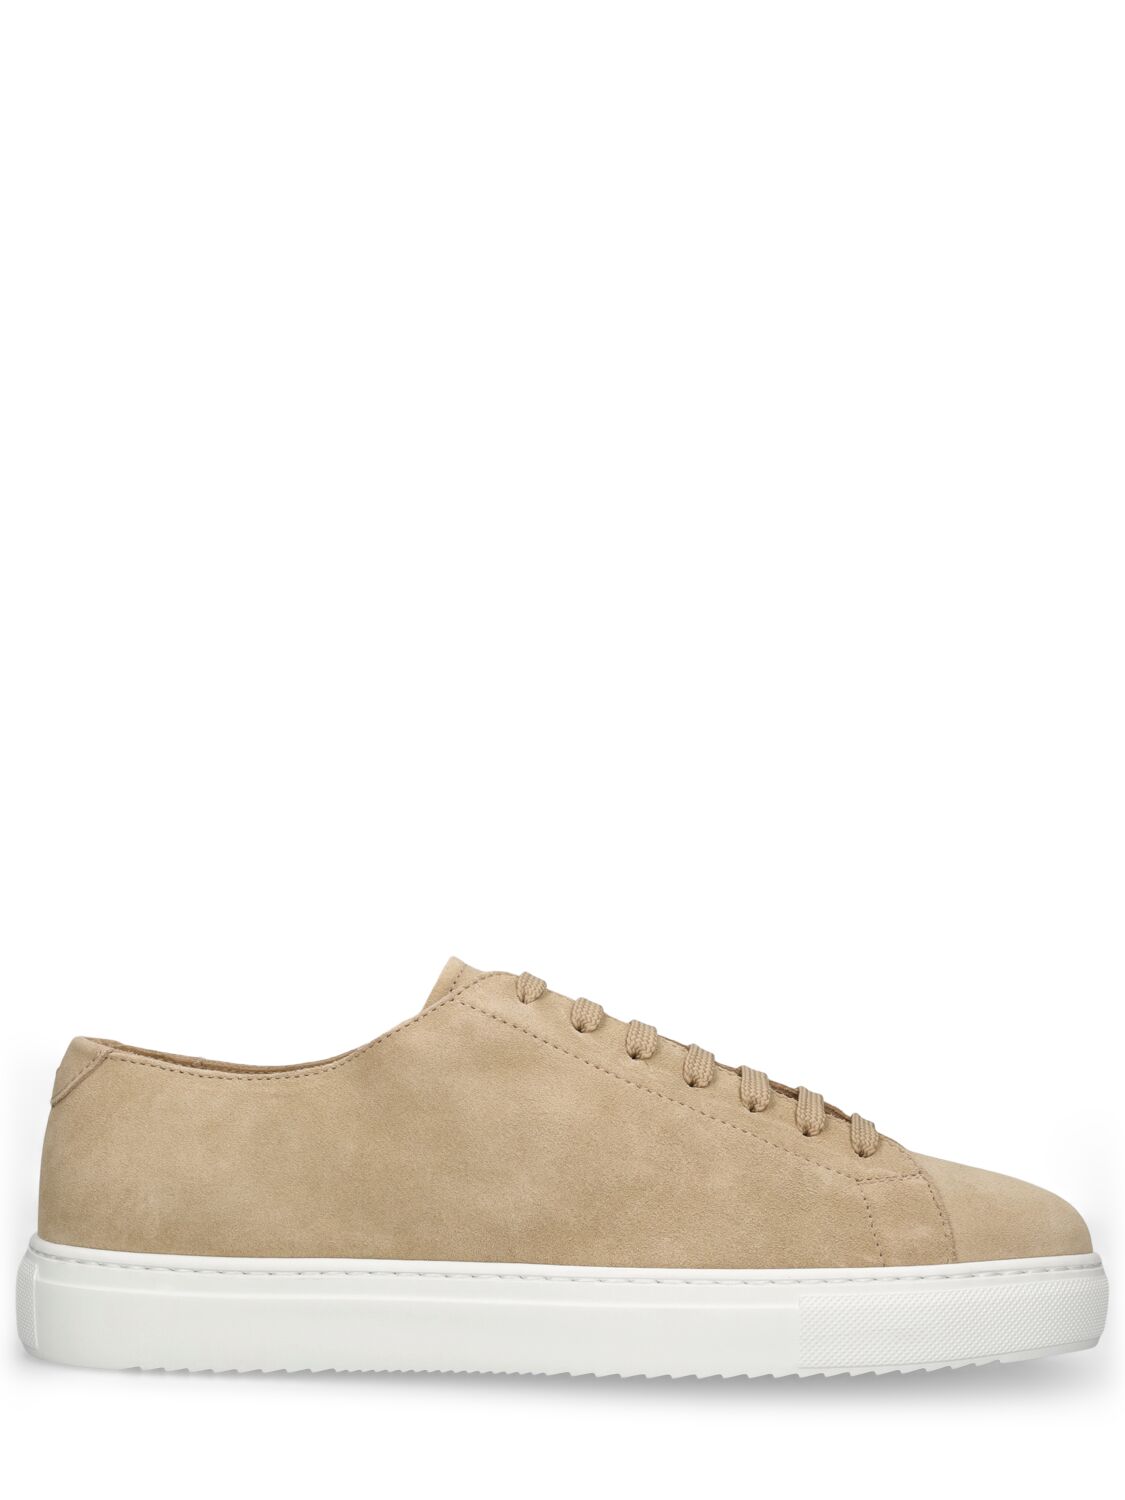 Doucal's Washed Suede Low Top Sneakers In Sand